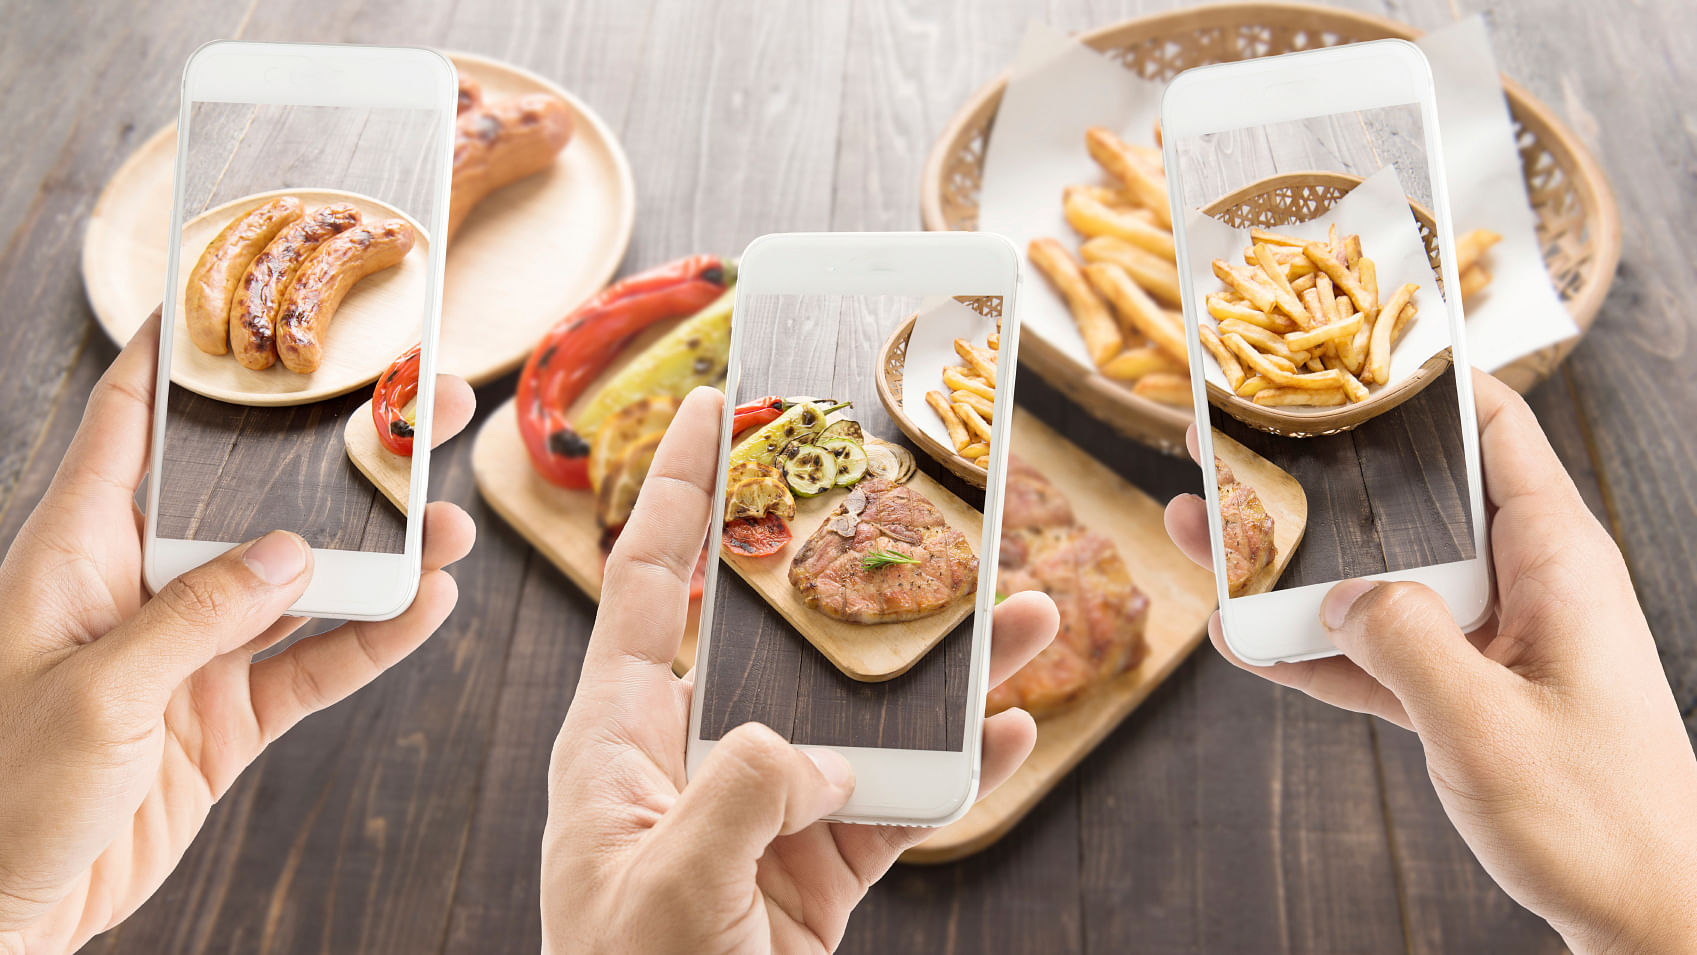 A new calorie counting tool will now be able to analyse pictures of food on Instagram to tell you how many calories you’ve consumed. (Photo: iStockphotos.com)